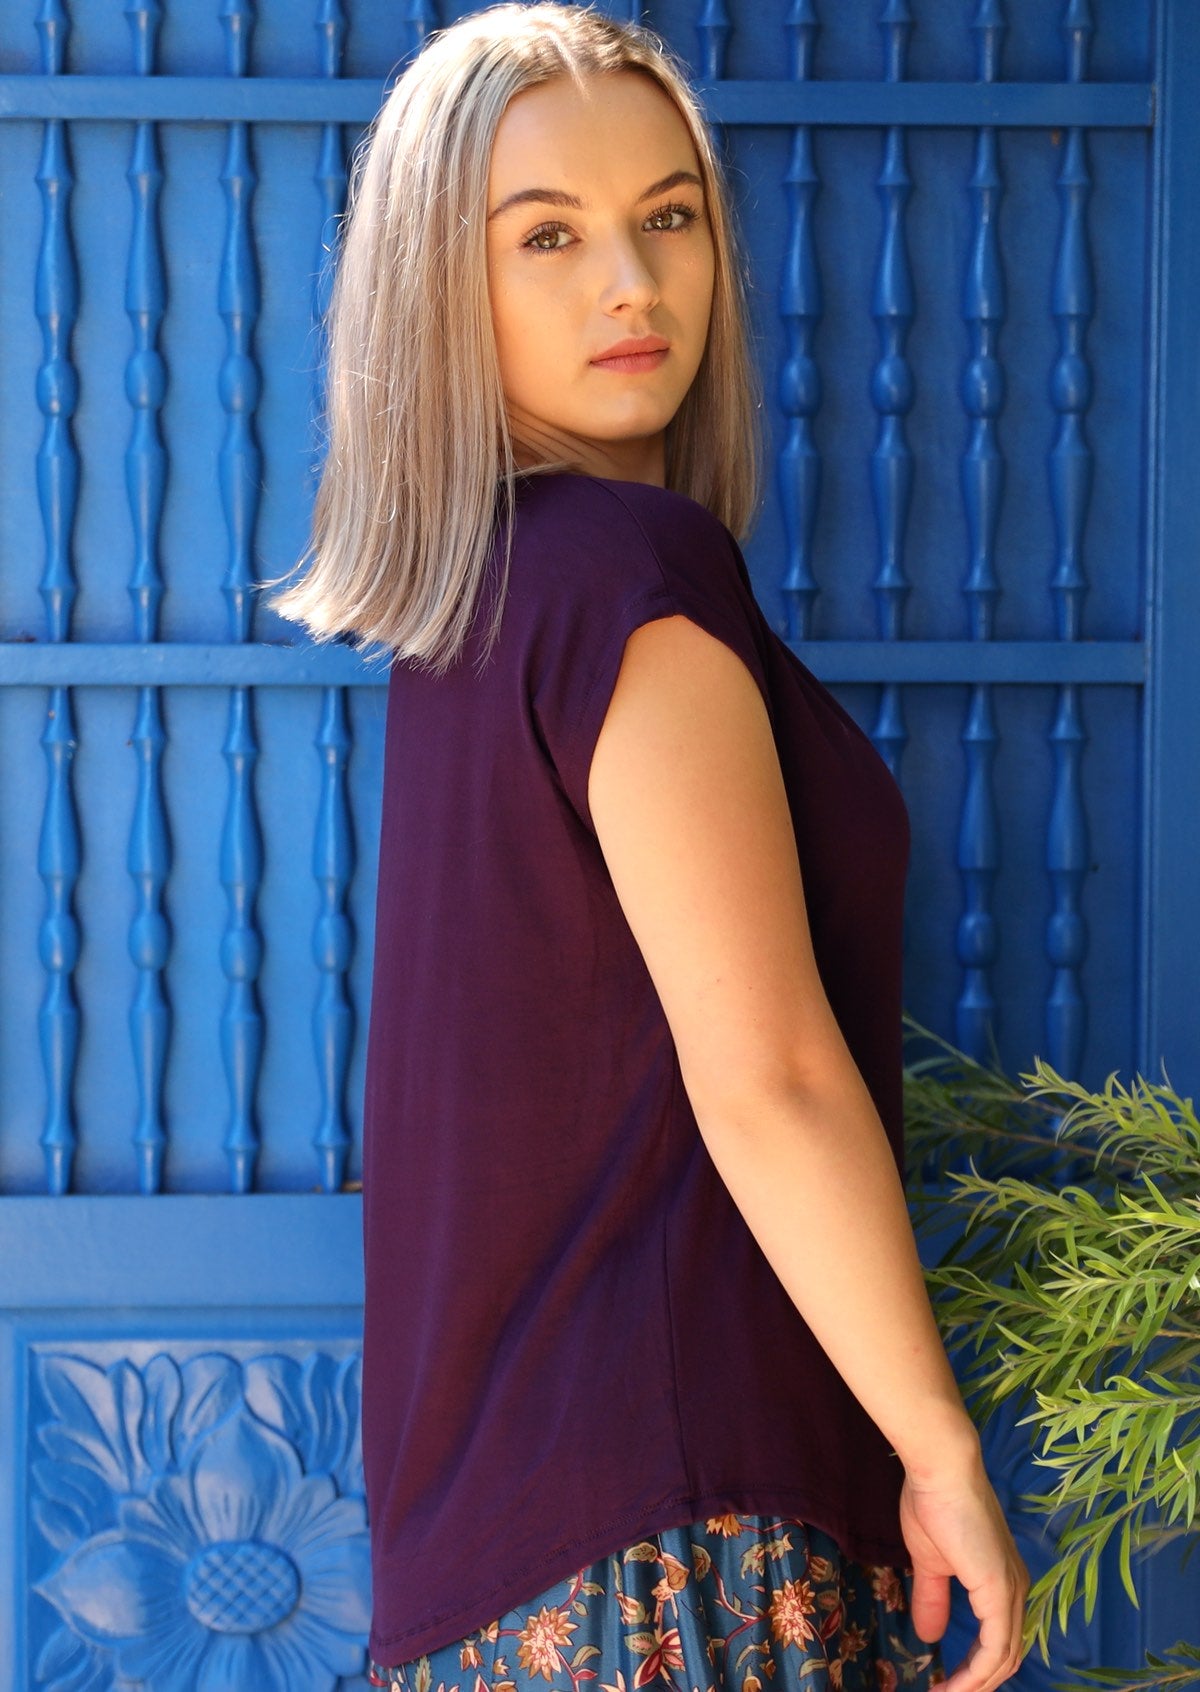 Side view of woman with blonde hair wearing a dark purple v-neck short cap sleeve rayon top